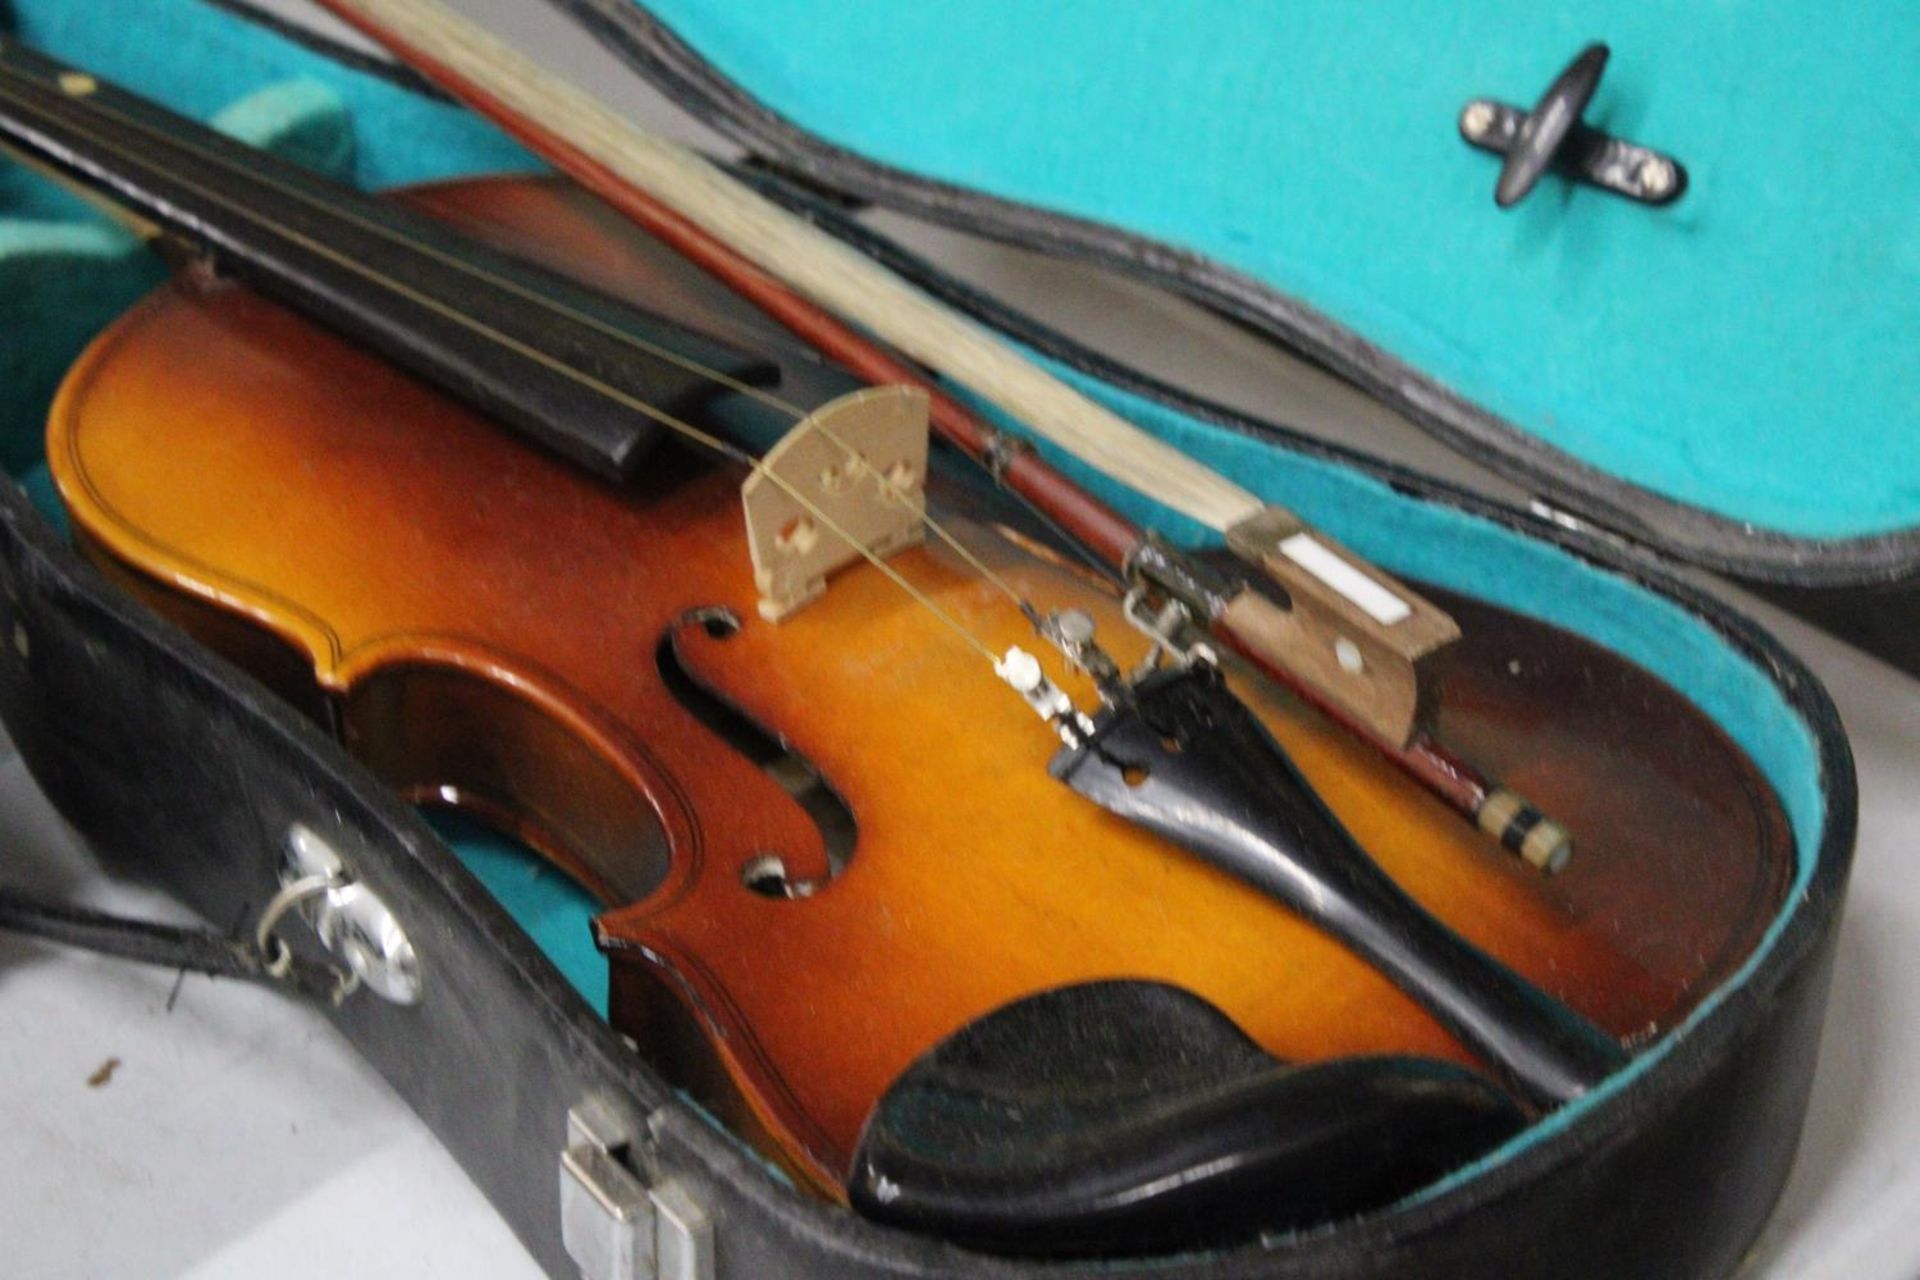 A VINTAGE VIOLIN WITH BOW IN CARRY CASE - Image 2 of 4